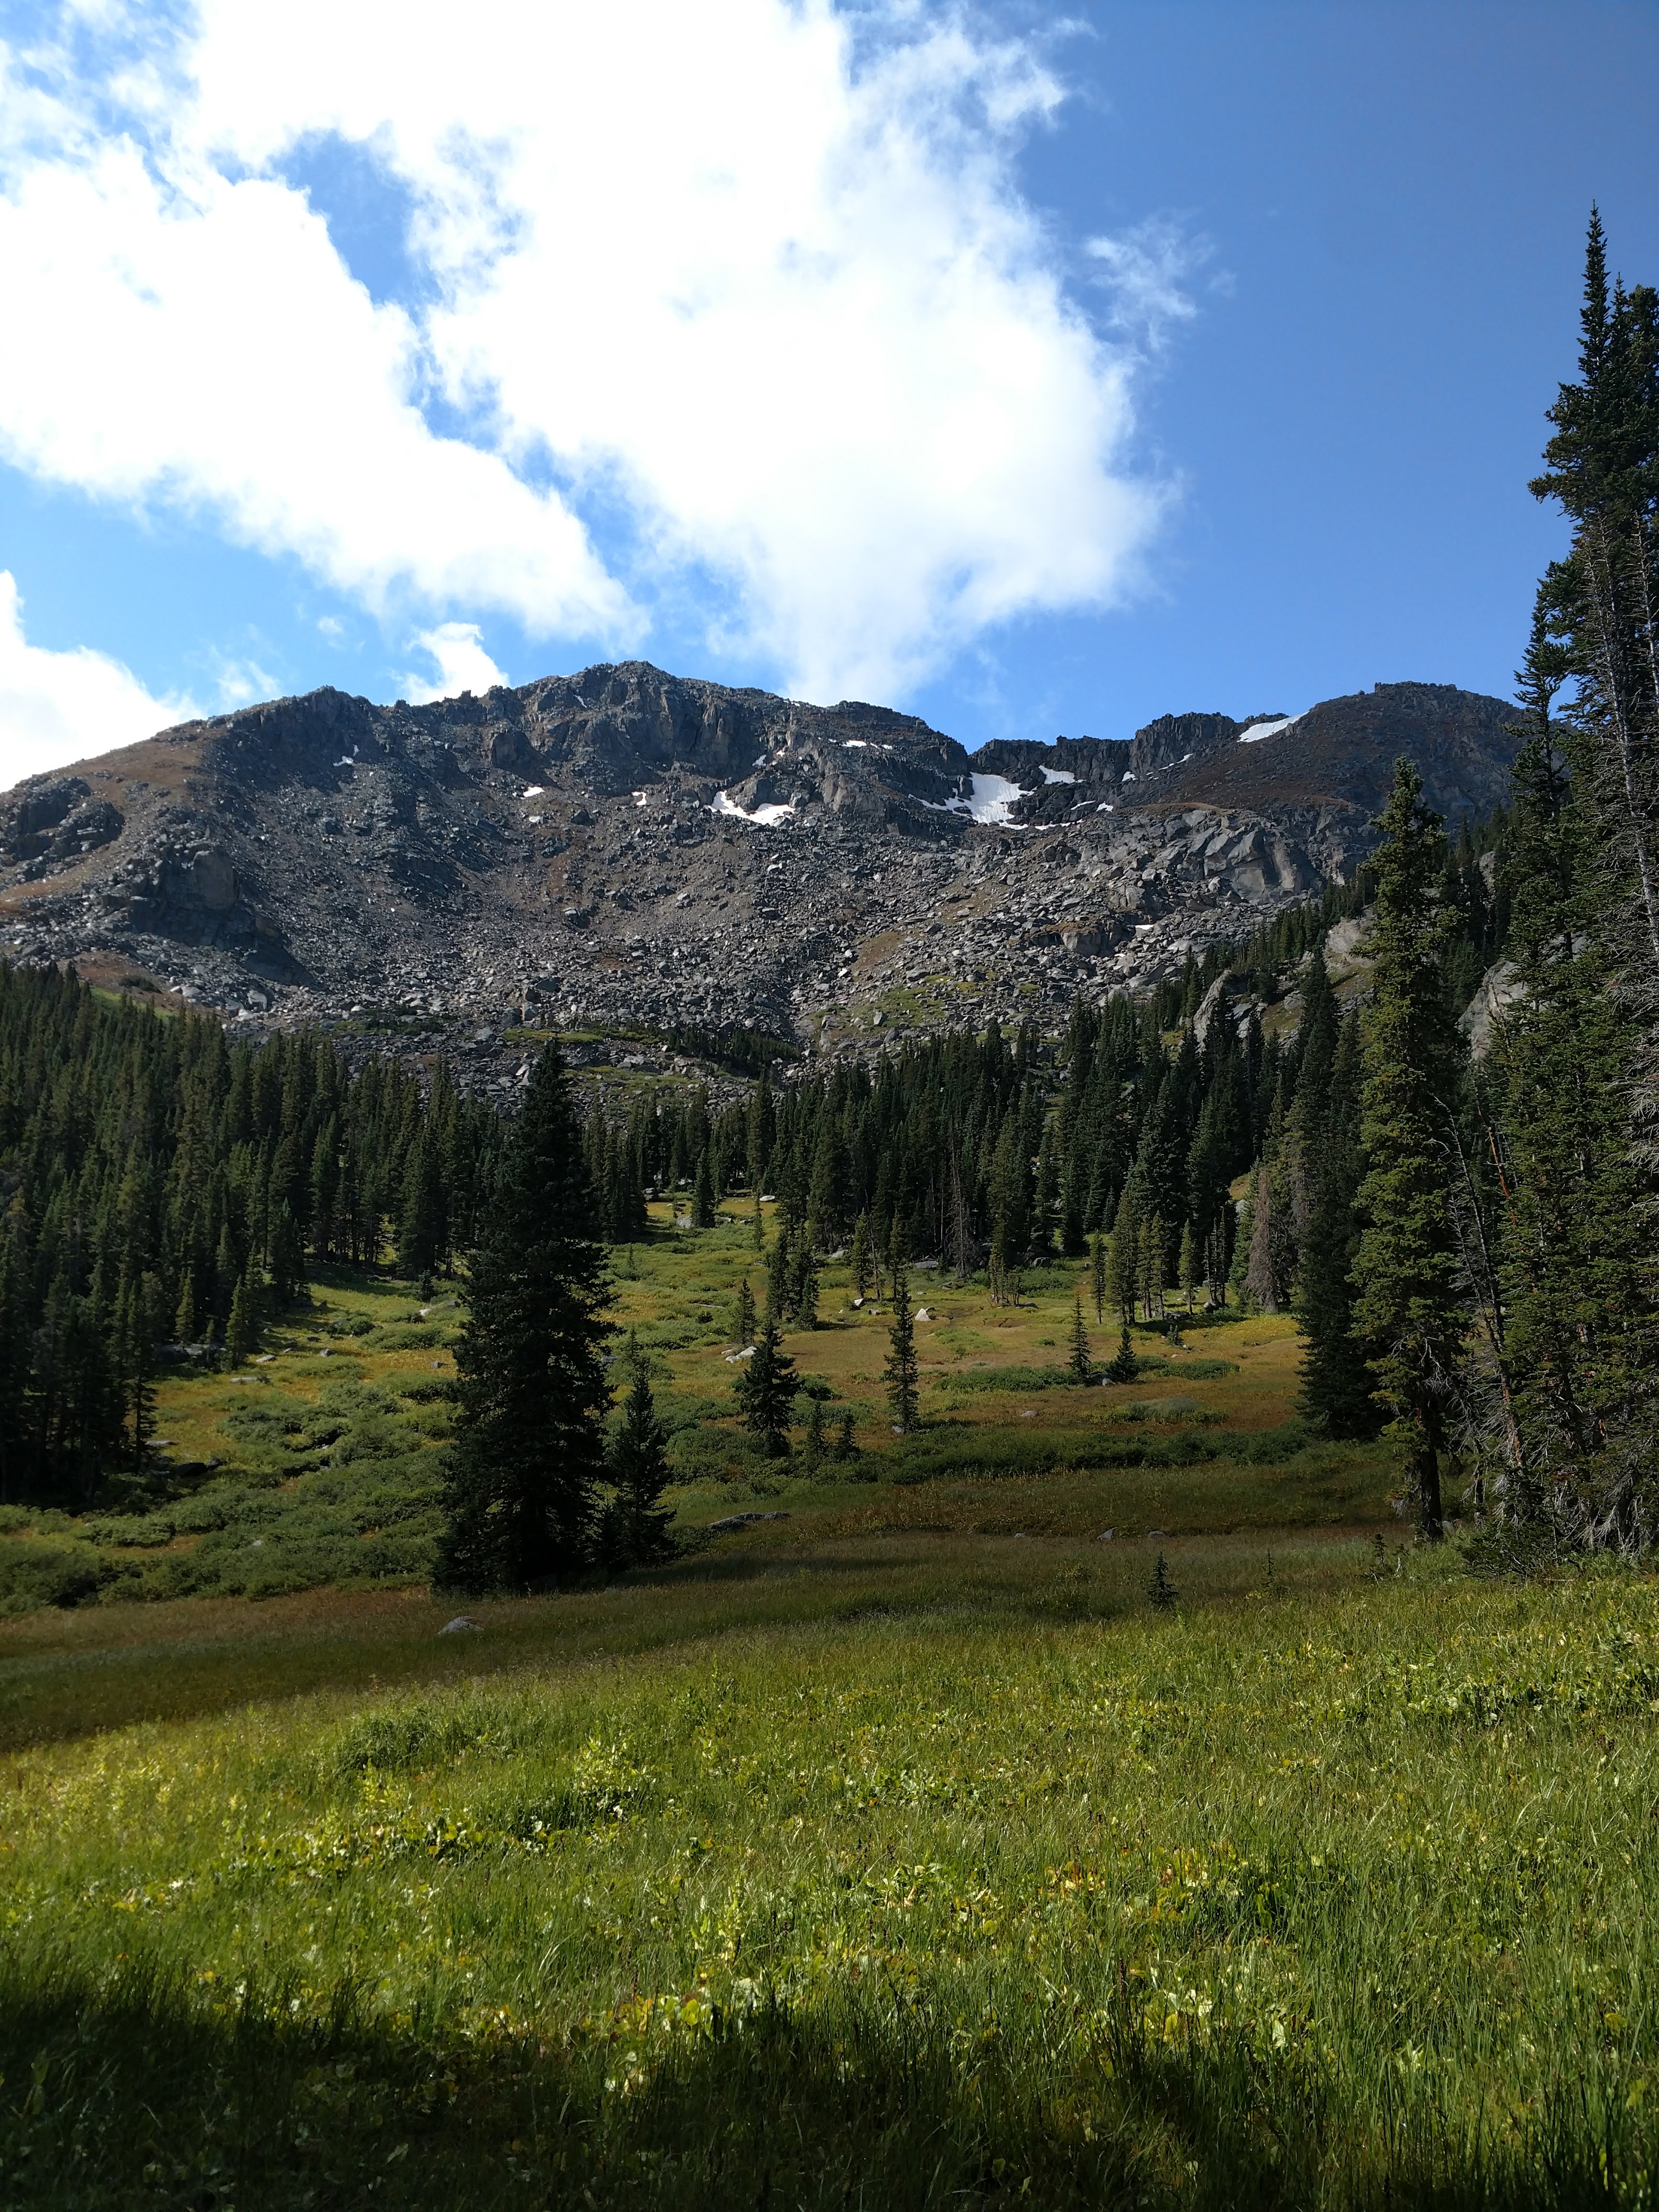 A gorgeous meadow for a base camp, don't you think?